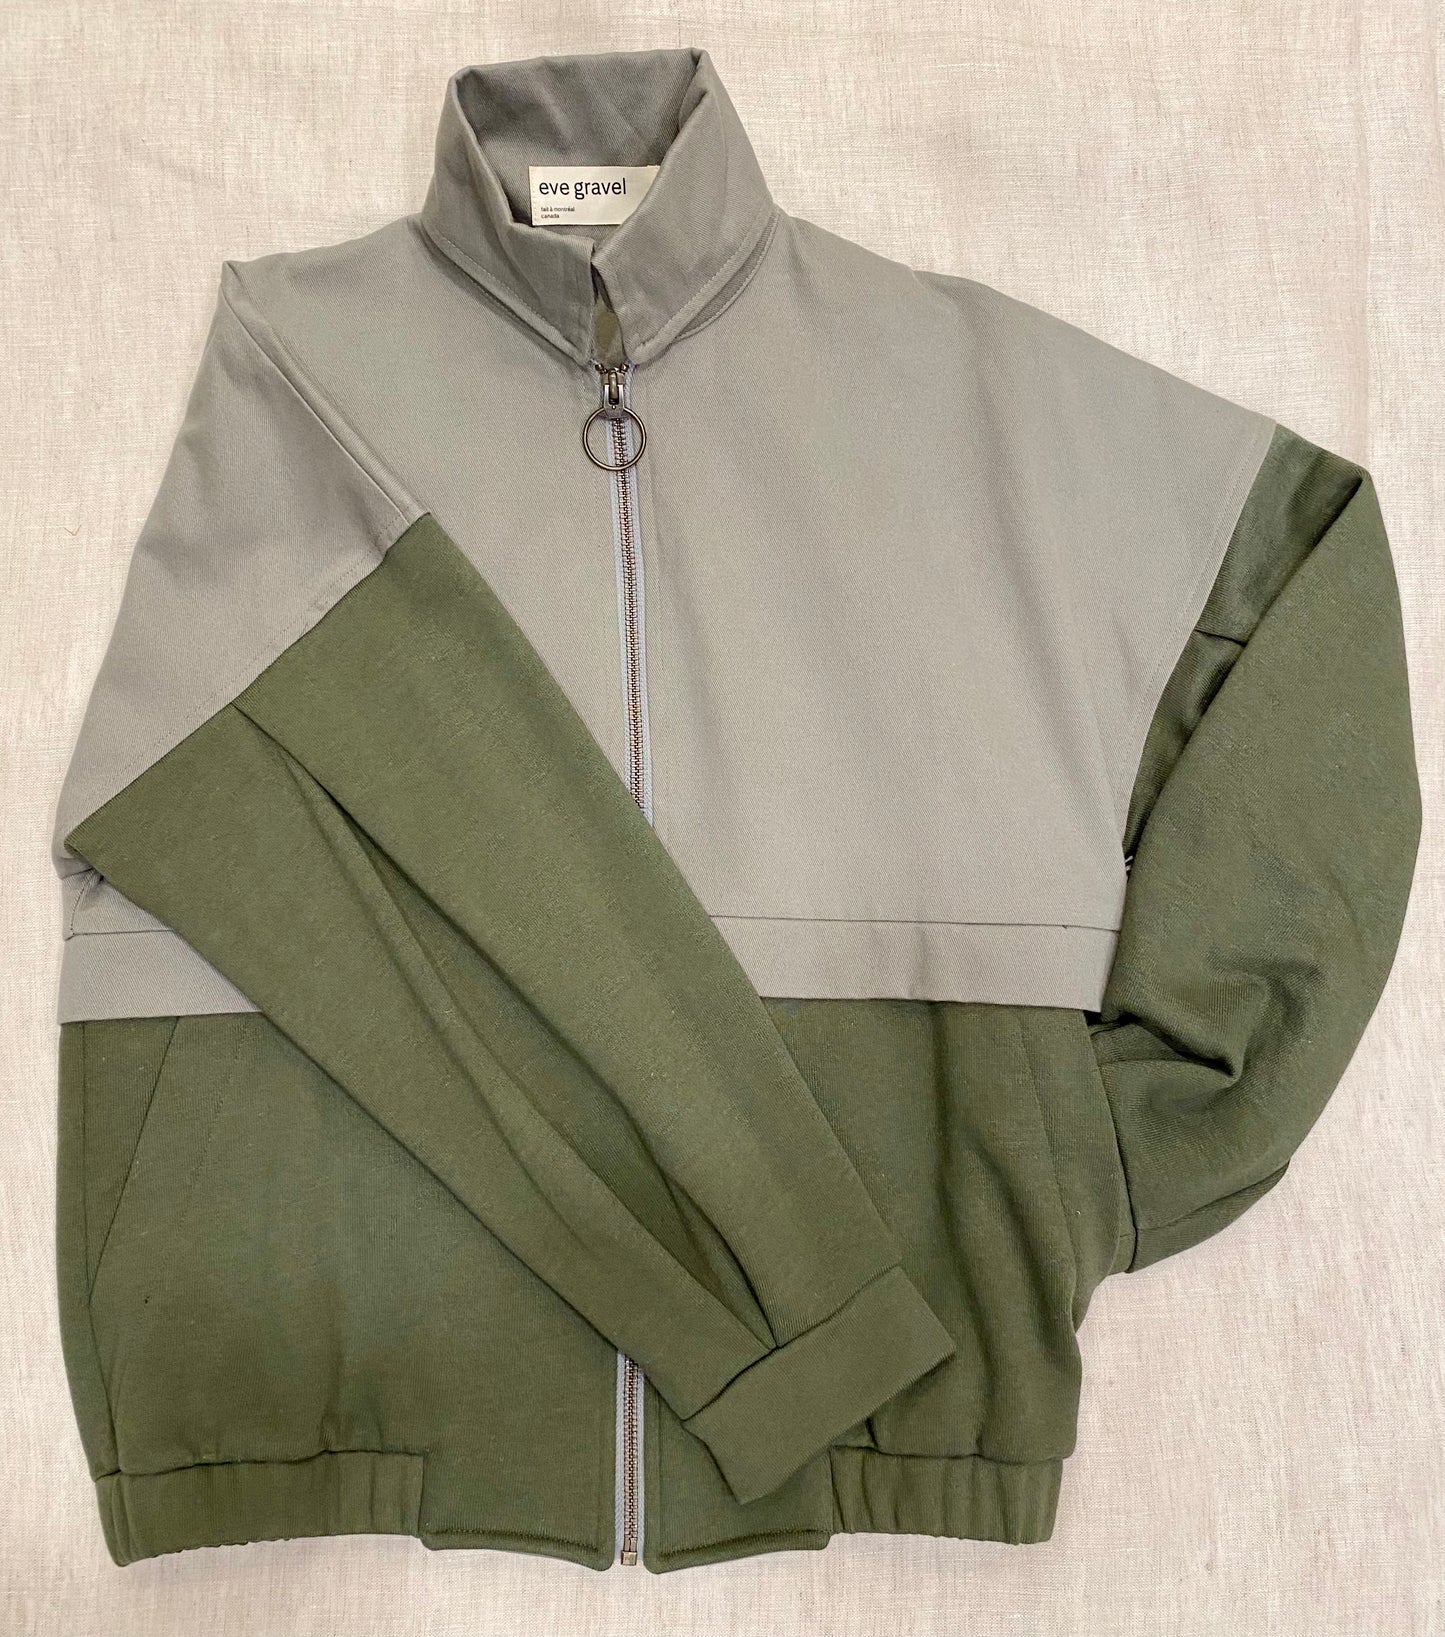 Eve Gravel Brando Jacket in Pine/Sage made in montreal canada